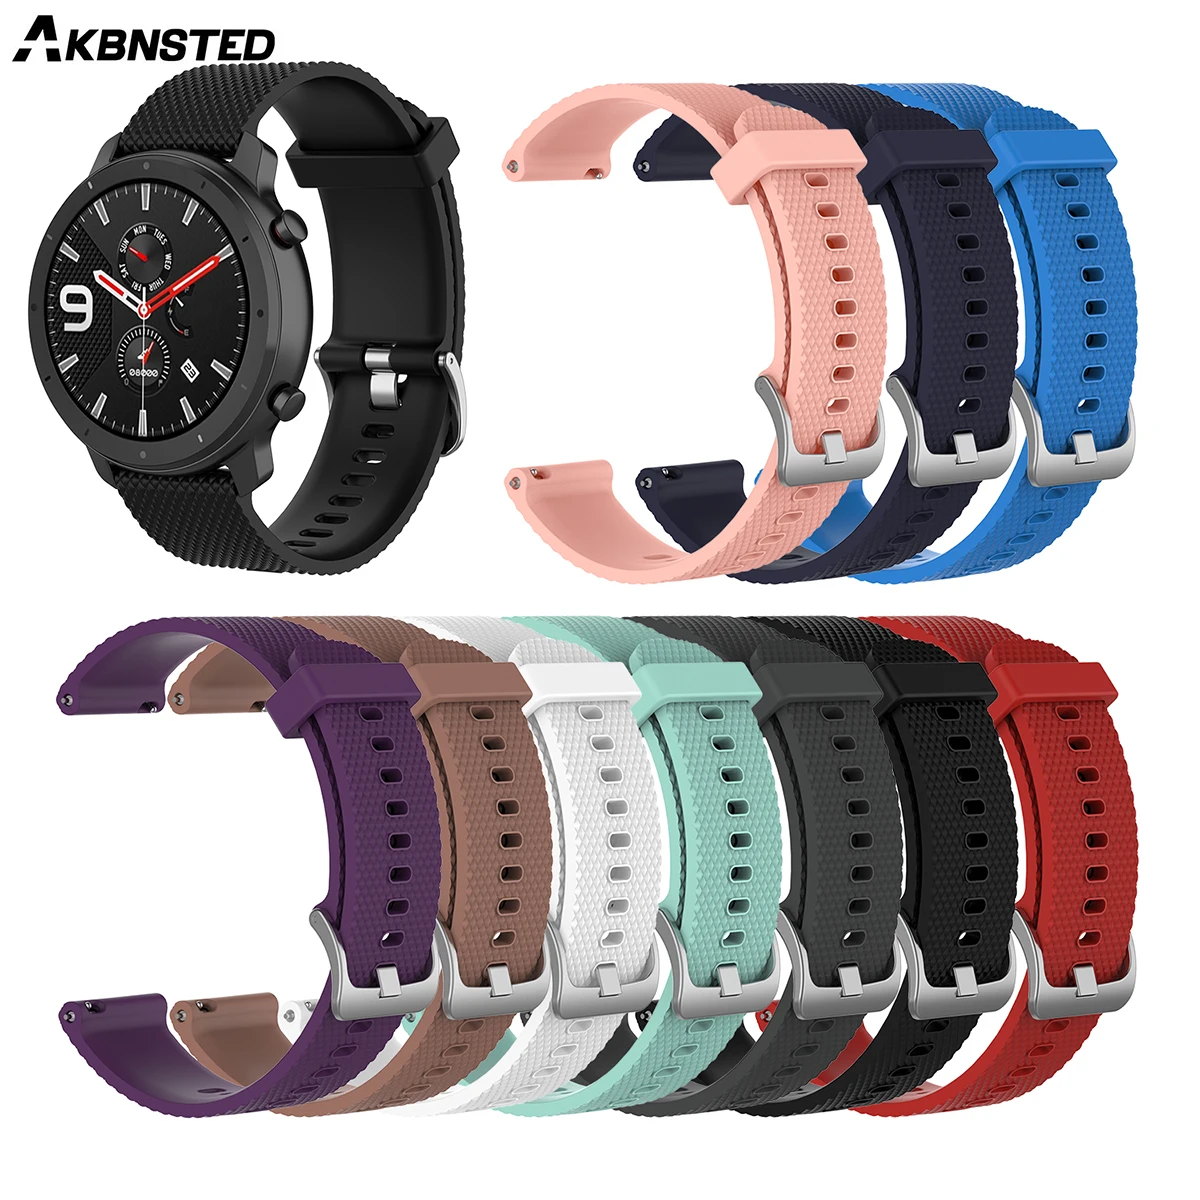 

AKBNSTED For Xiaomi Huami Amazfit GTR 47mm/42mm Colorful Silicones Watch Strap For Huami Amazfit Wristband Replace Accessories